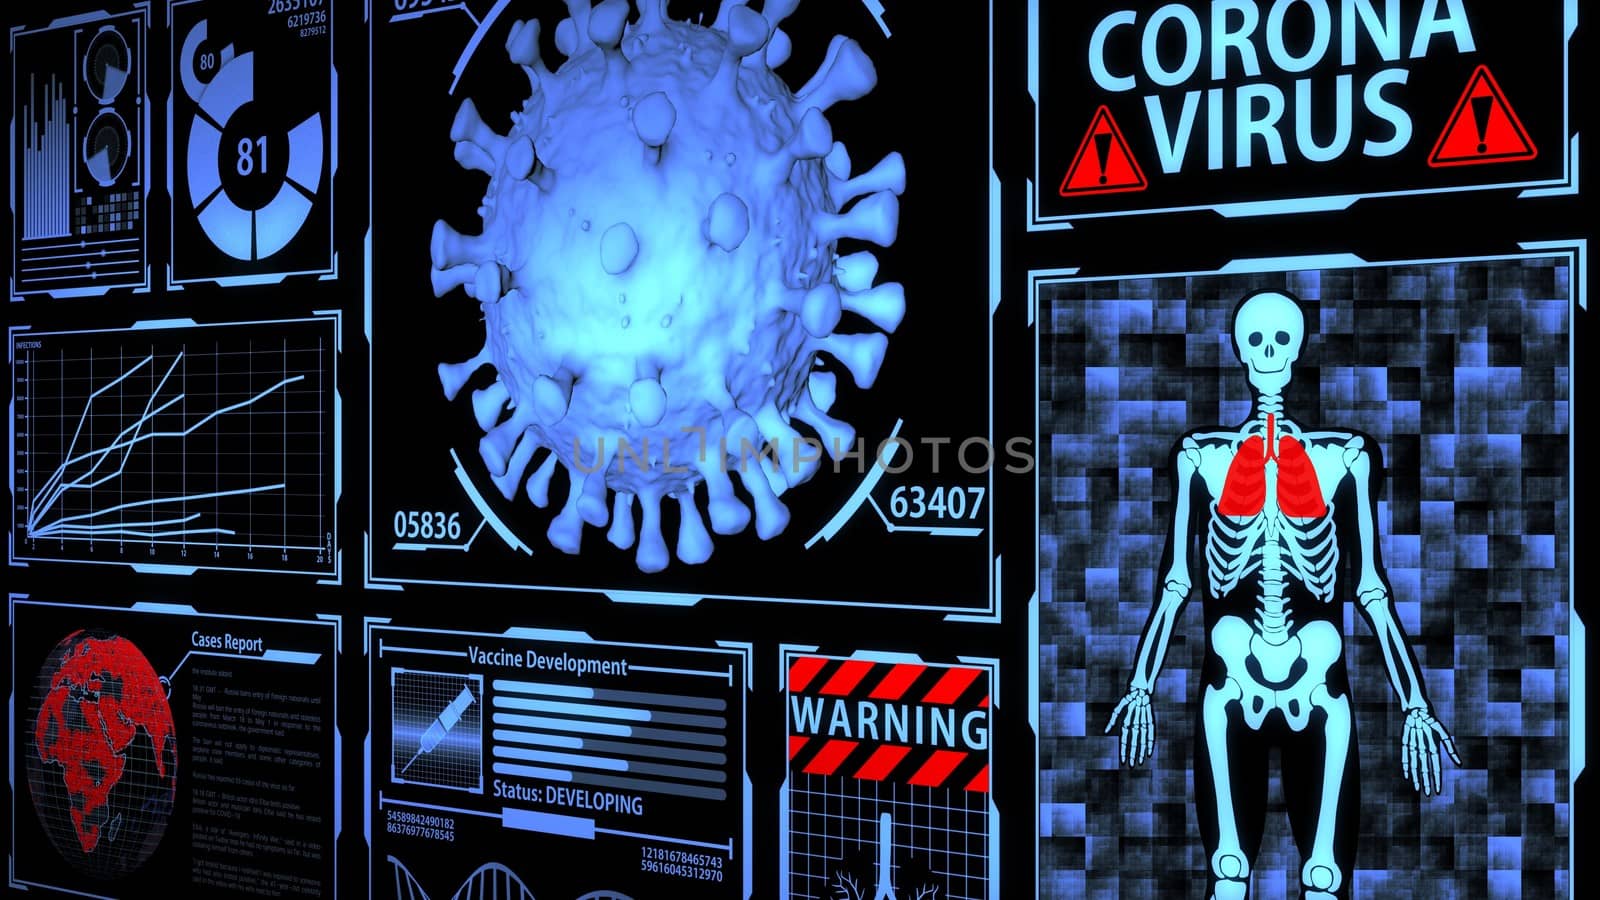 Coronavirus/Covid-19 3D Model in Futuristic Digital Medical HUD with Epidemic Detection, Vaccine Development process and Worldwide Cases Report Background Ver.3 by ariya23156